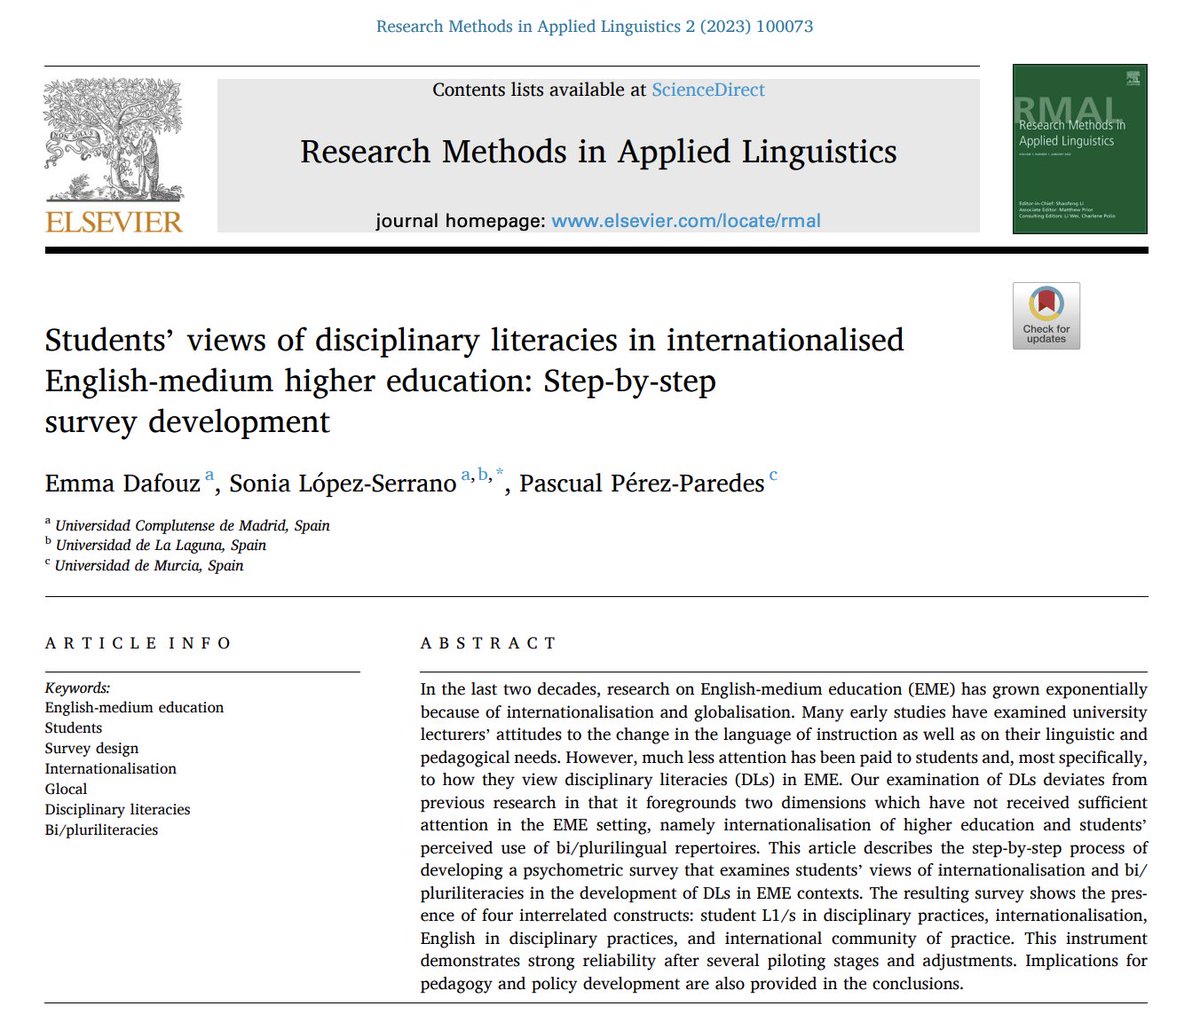 @ShiftRProject will be looking today @Aesla2024 @aesla_twit  at students' disciplinary literacies trajectories in English-medium Business programs. Check out our open access paper and download the survey here sciencedirect.com/science/articl… #appliedlinguistics